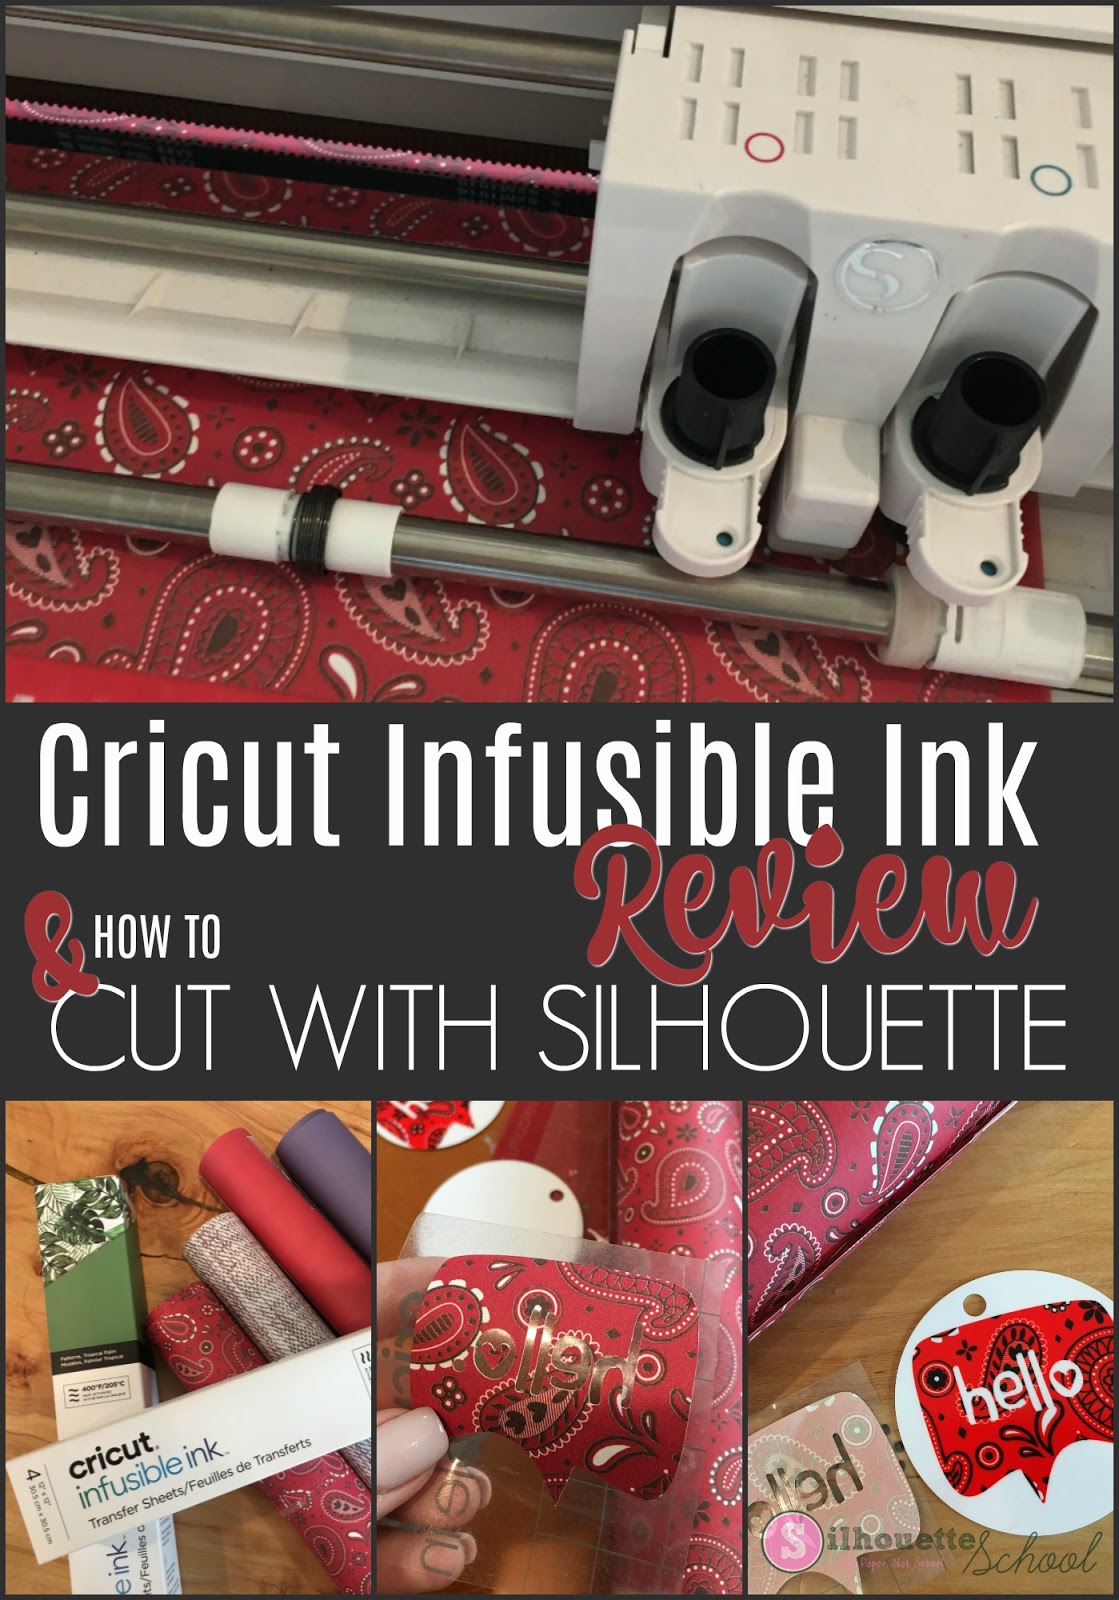 CRICUT INFUSIBLE INK